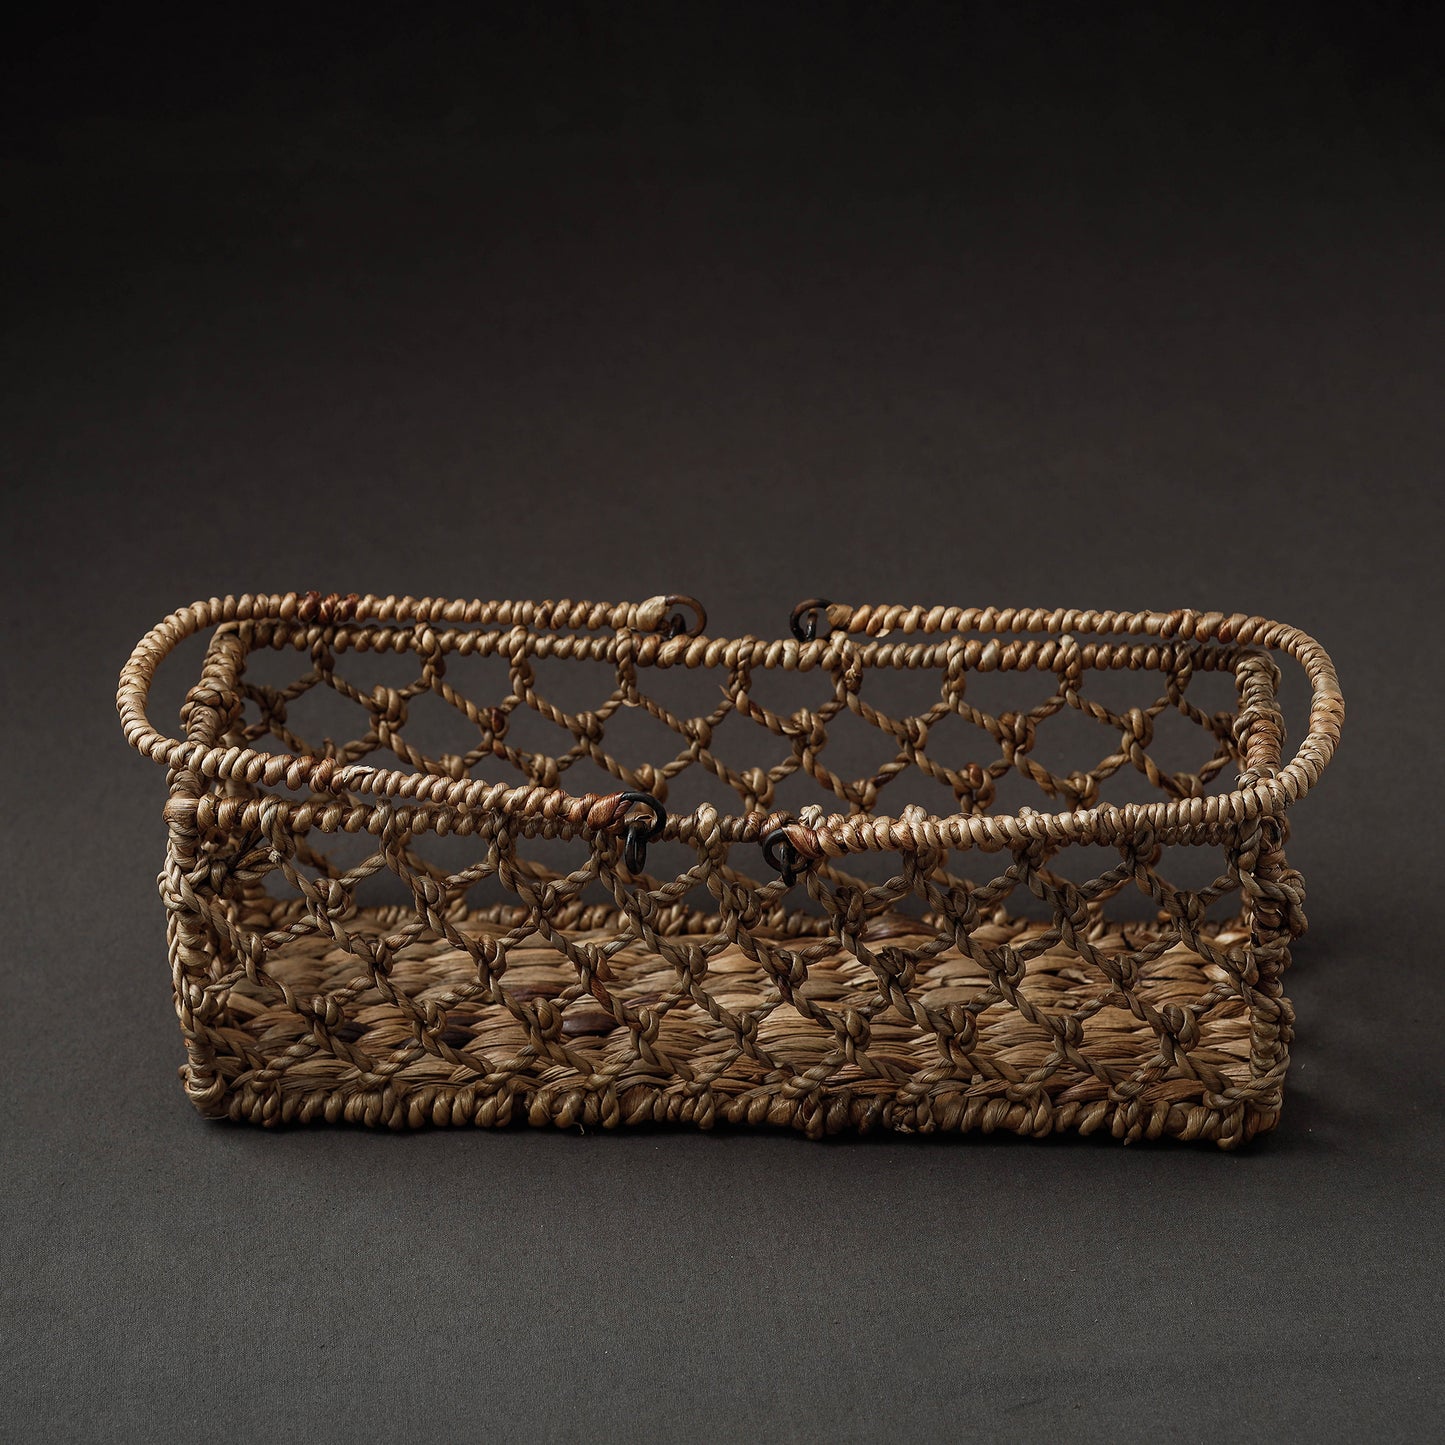 Handcrafted Organic Water Hyacinth Plush Basket (12 x 4 in)